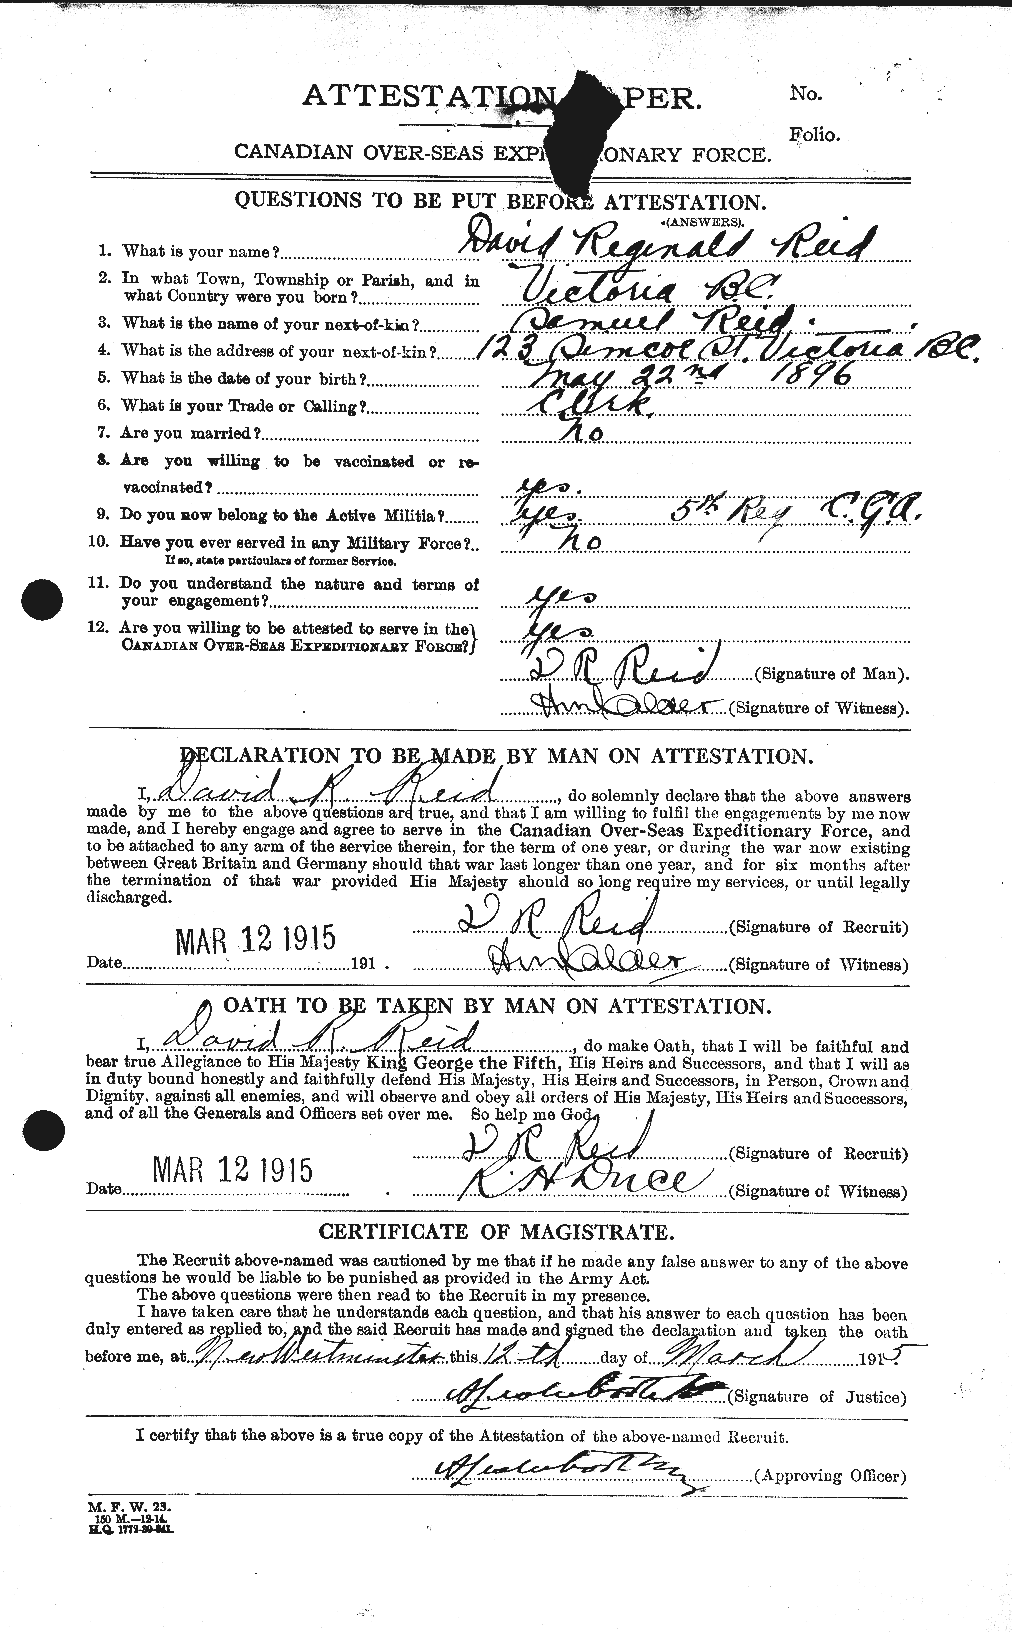 Personnel Records of the First World War - CEF 597946a